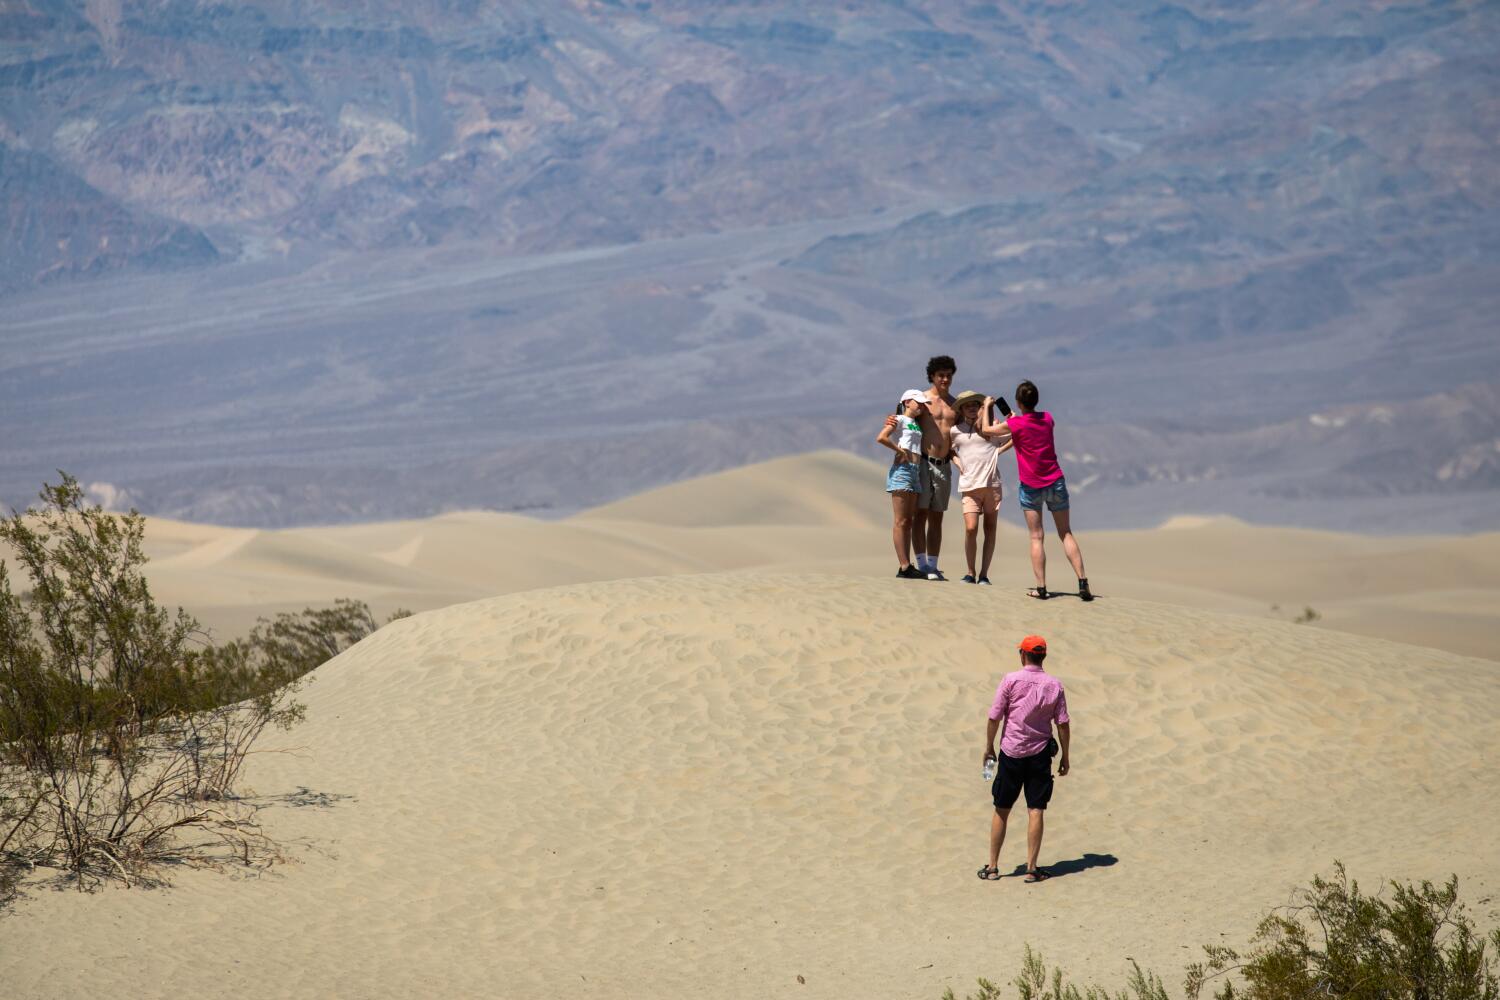 Death Valley sets another heat record. August temperatures also could be above average